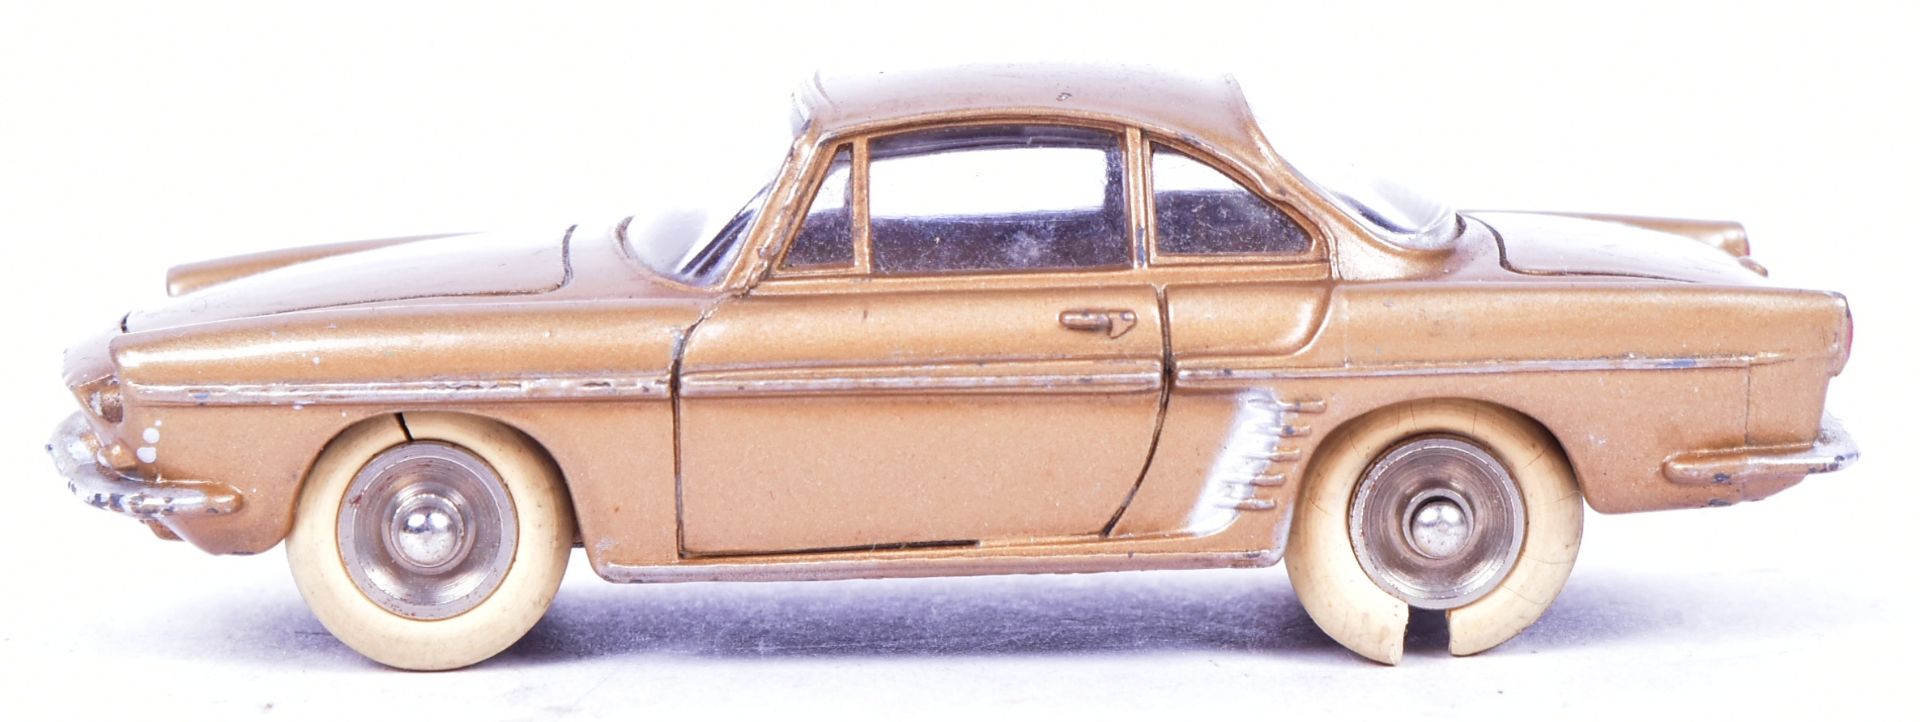 DIECAST - FRENCH DINKY TOYS - RENAULT FLORIDE - Image 2 of 4